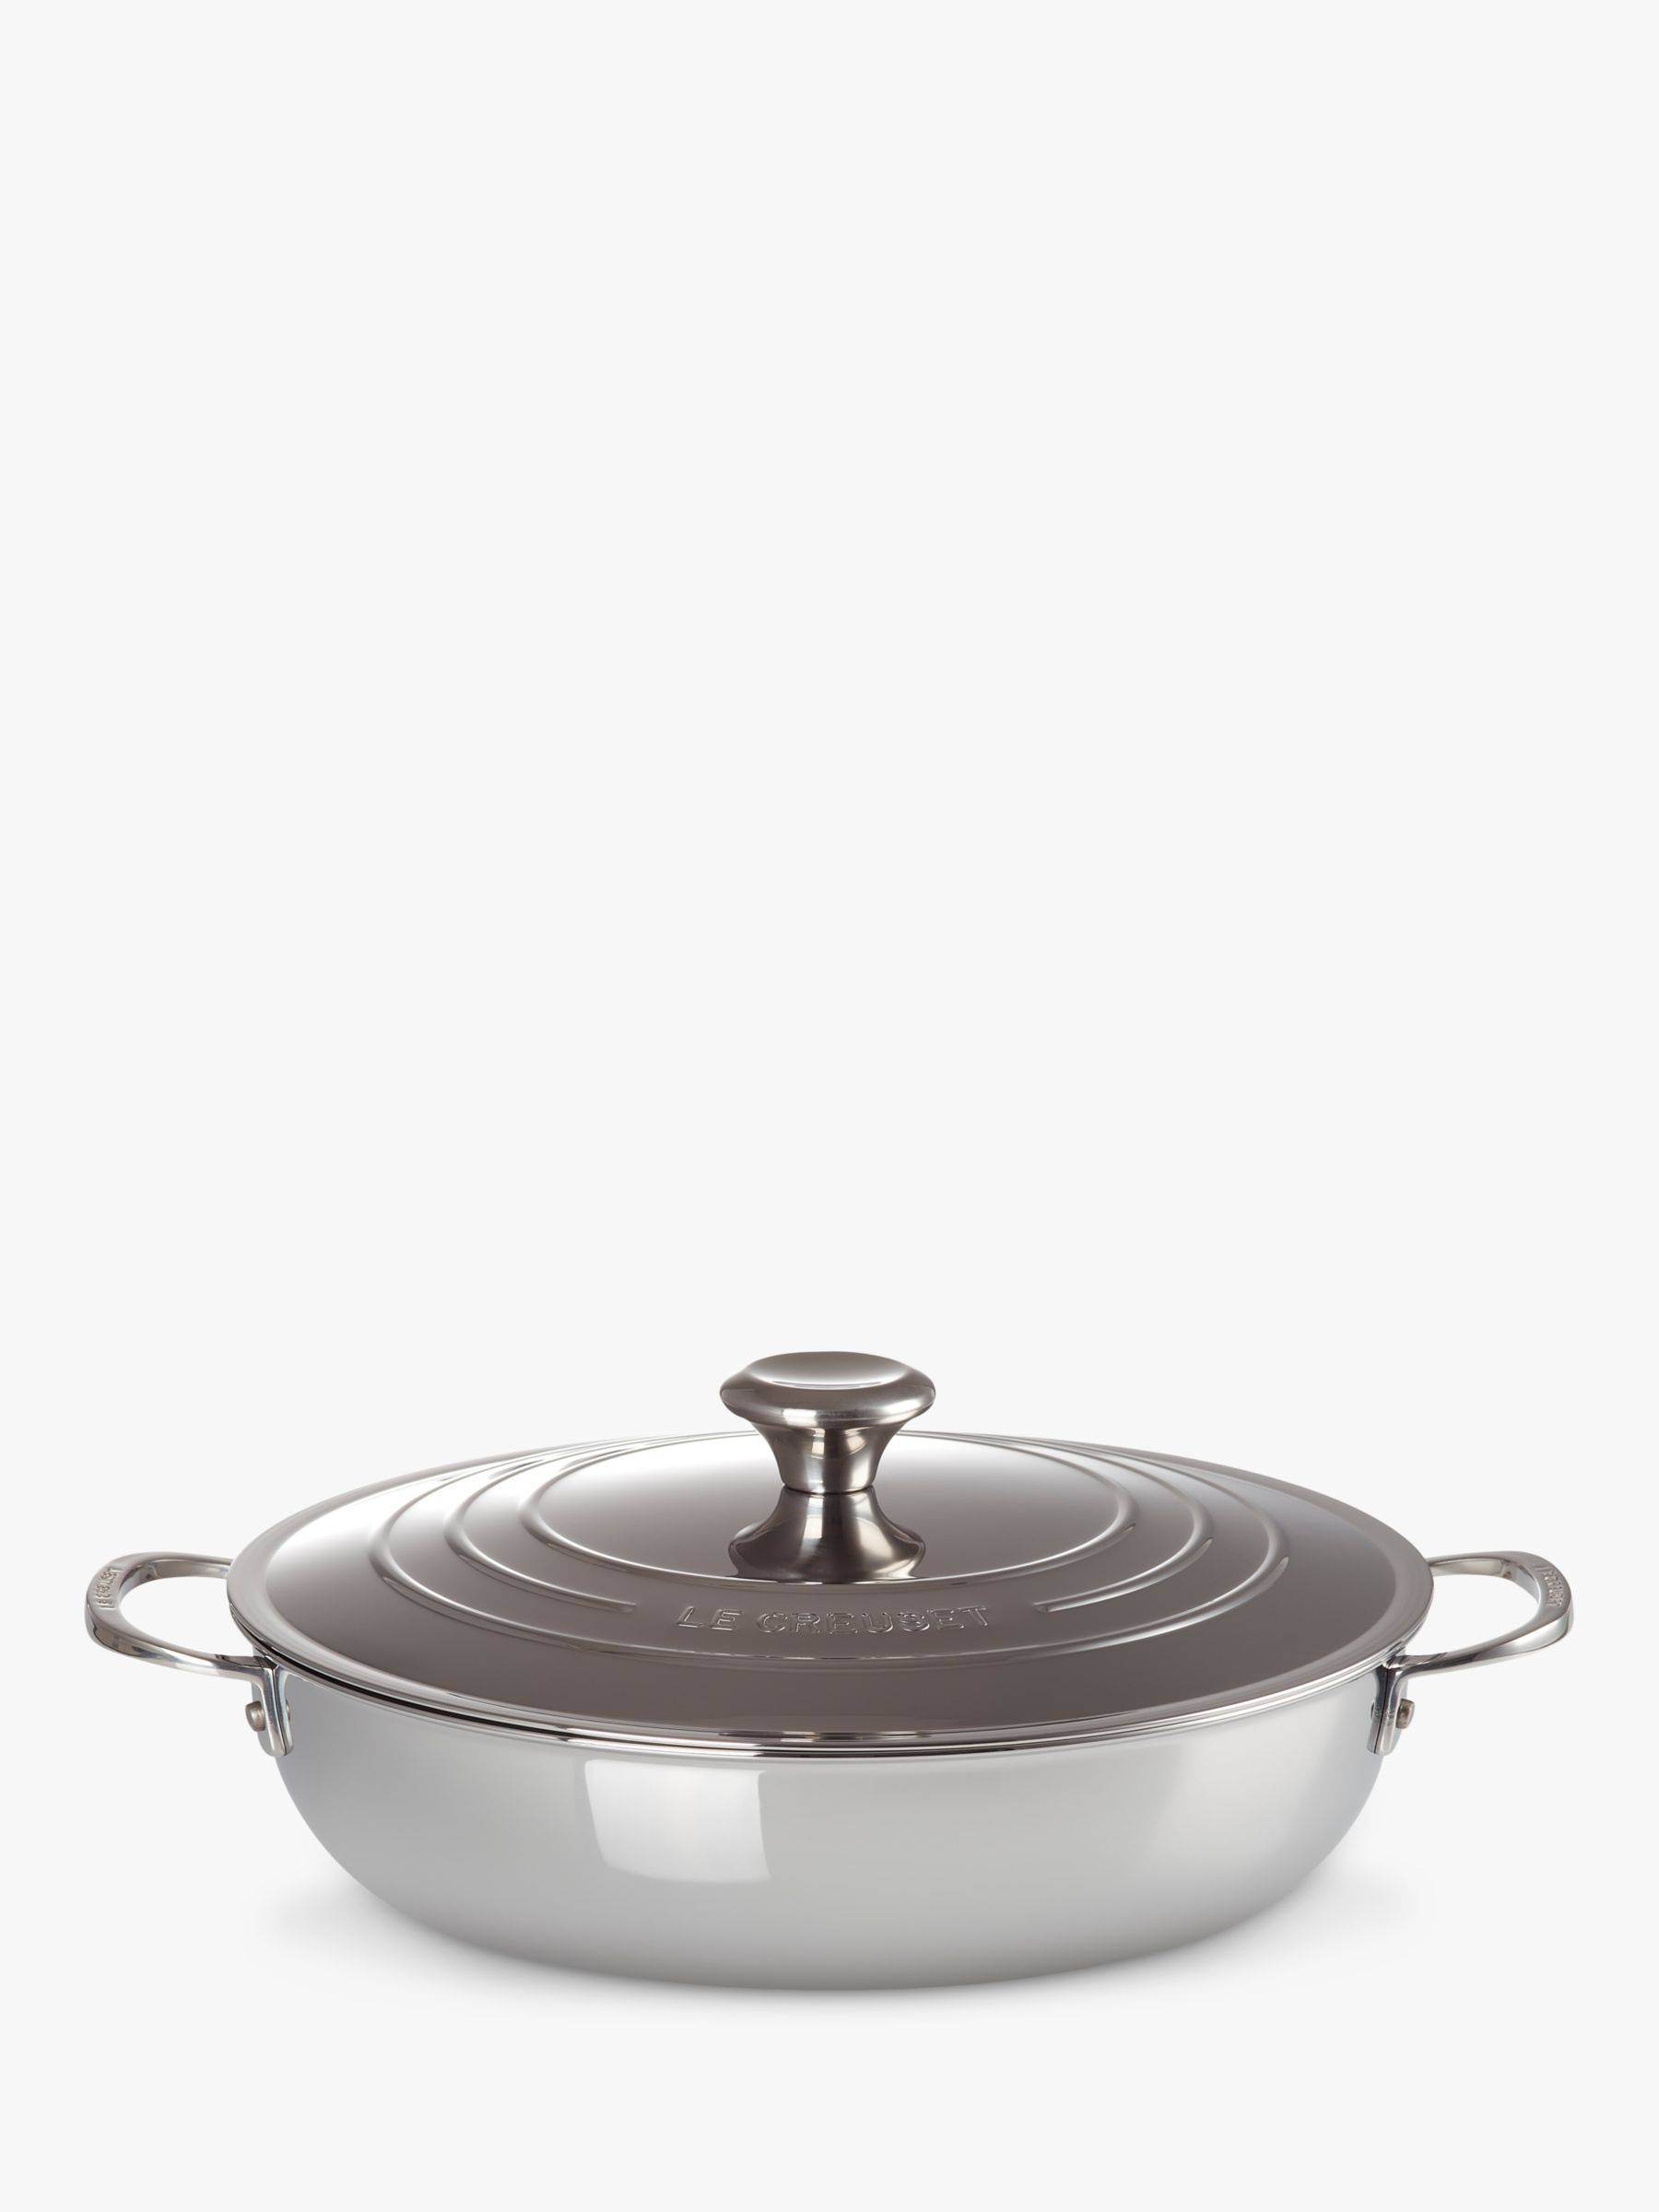 Le Creuset Signature 3-Ply Stainless Steel Shallow Casserole with Lid, 30cm